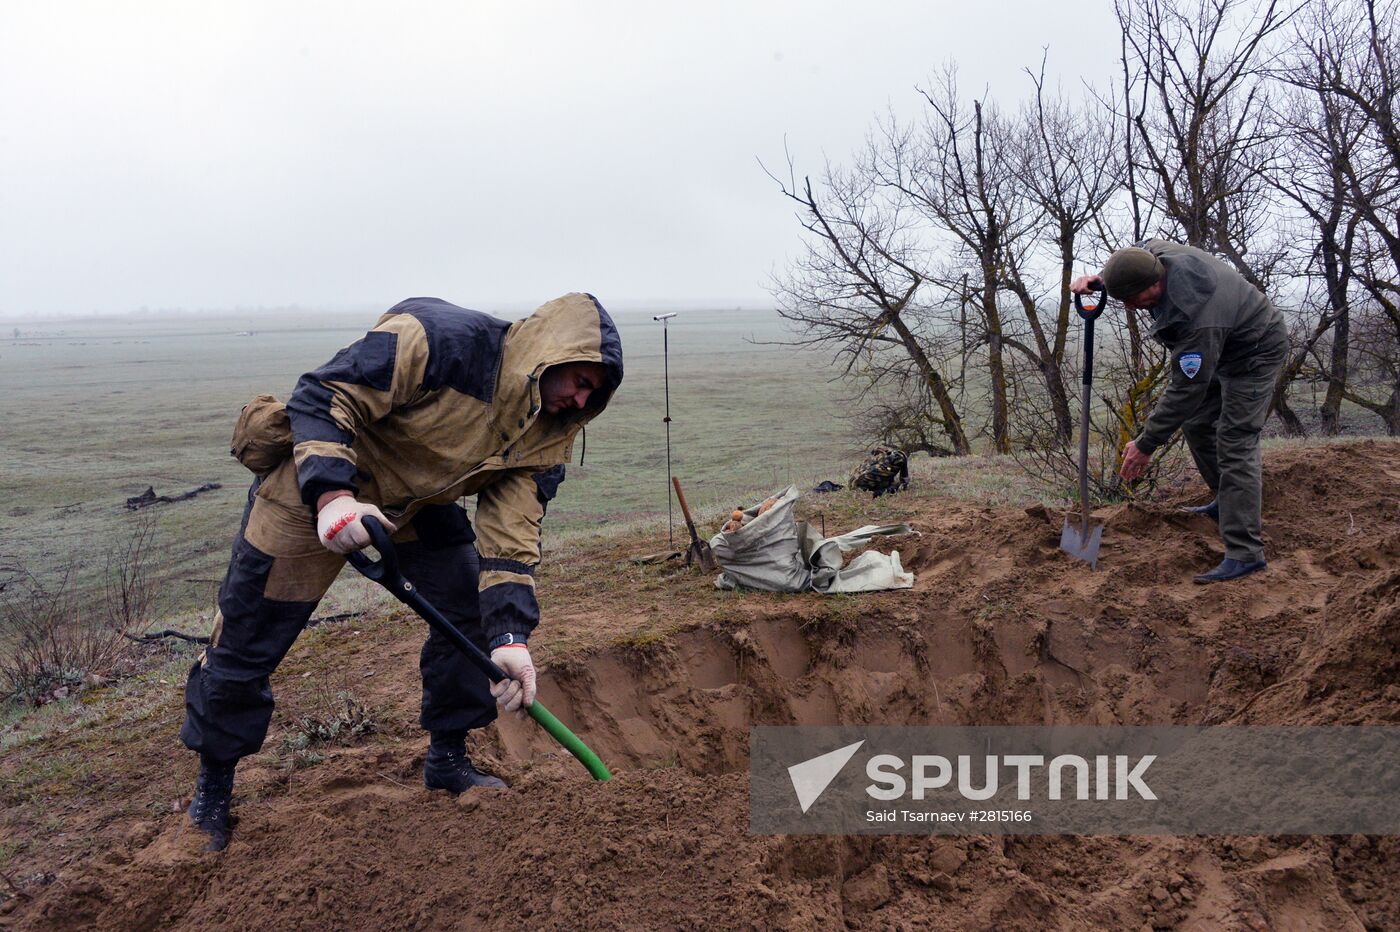 Searching for remains of soldiers killed during the Great Patriotic War, in the Chechen Republic